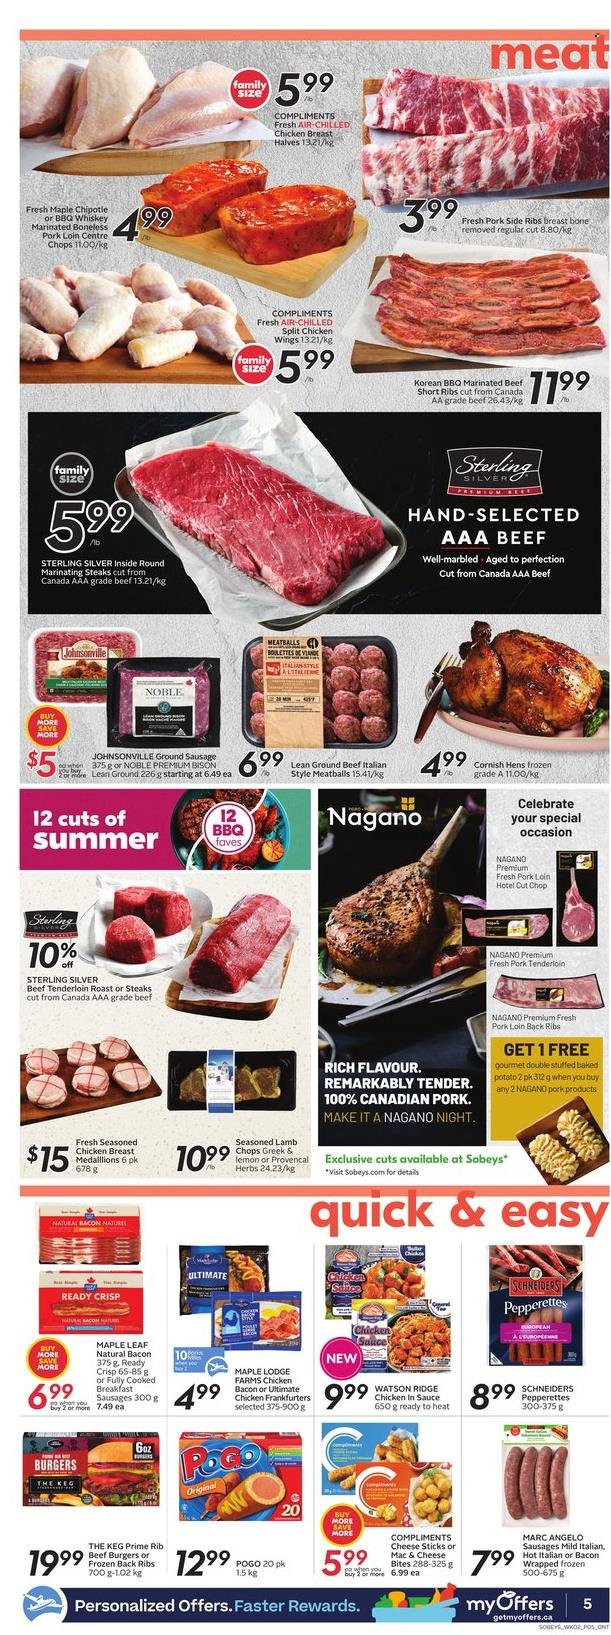 thumbnail - Sobeys Flyer - May 12, 2022 - May 18, 2022 - Sales products - meatballs, hamburger, beef burger, bacon, Johnsonville, sausage, chicken wings, cheese sticks, herbs, whiskey, whisky, chicken breasts, chicken, beef meat, beef ribs, ground beef, beef tenderloin, marinated beef, pork loin, pork meat, pork tenderloin, lamb chops, lamb meat, steak. Page 5.